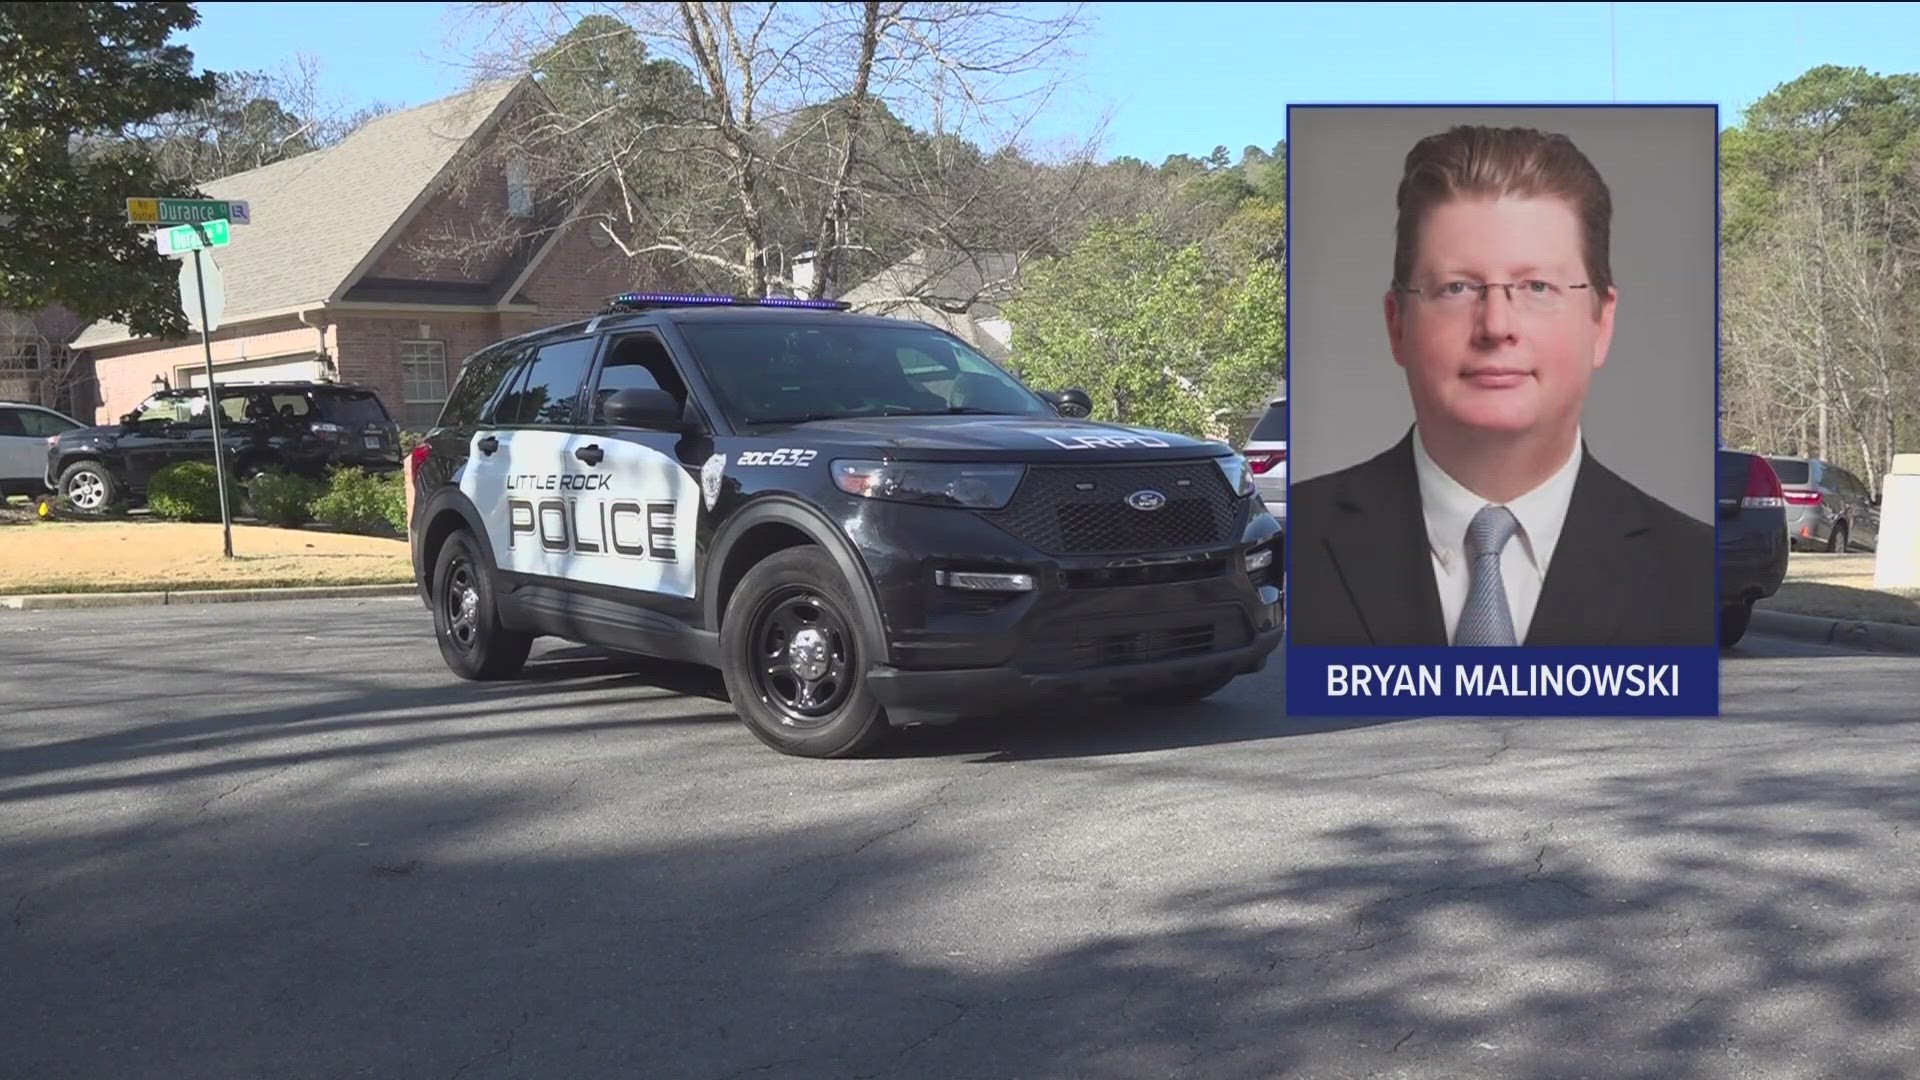 Brian Malinowski was shot by agents who were serving a search warrant at his home. Watch the video to learn more.